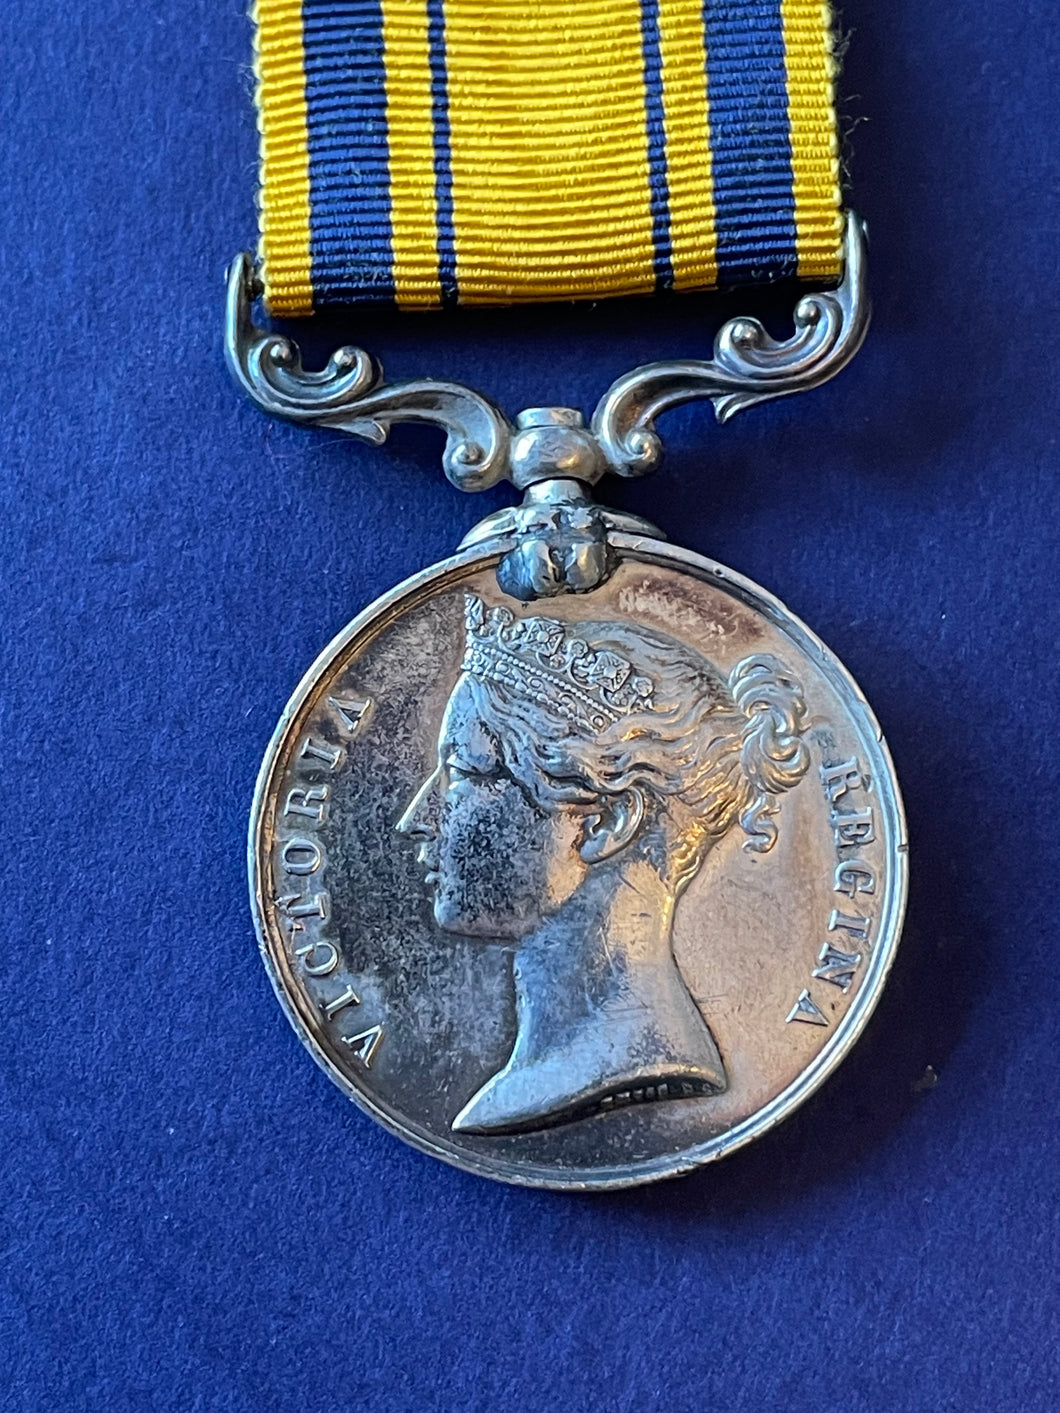 South Africa General Service Medal, No bar - Sergeant T. Wright, Royal Durban Rifles